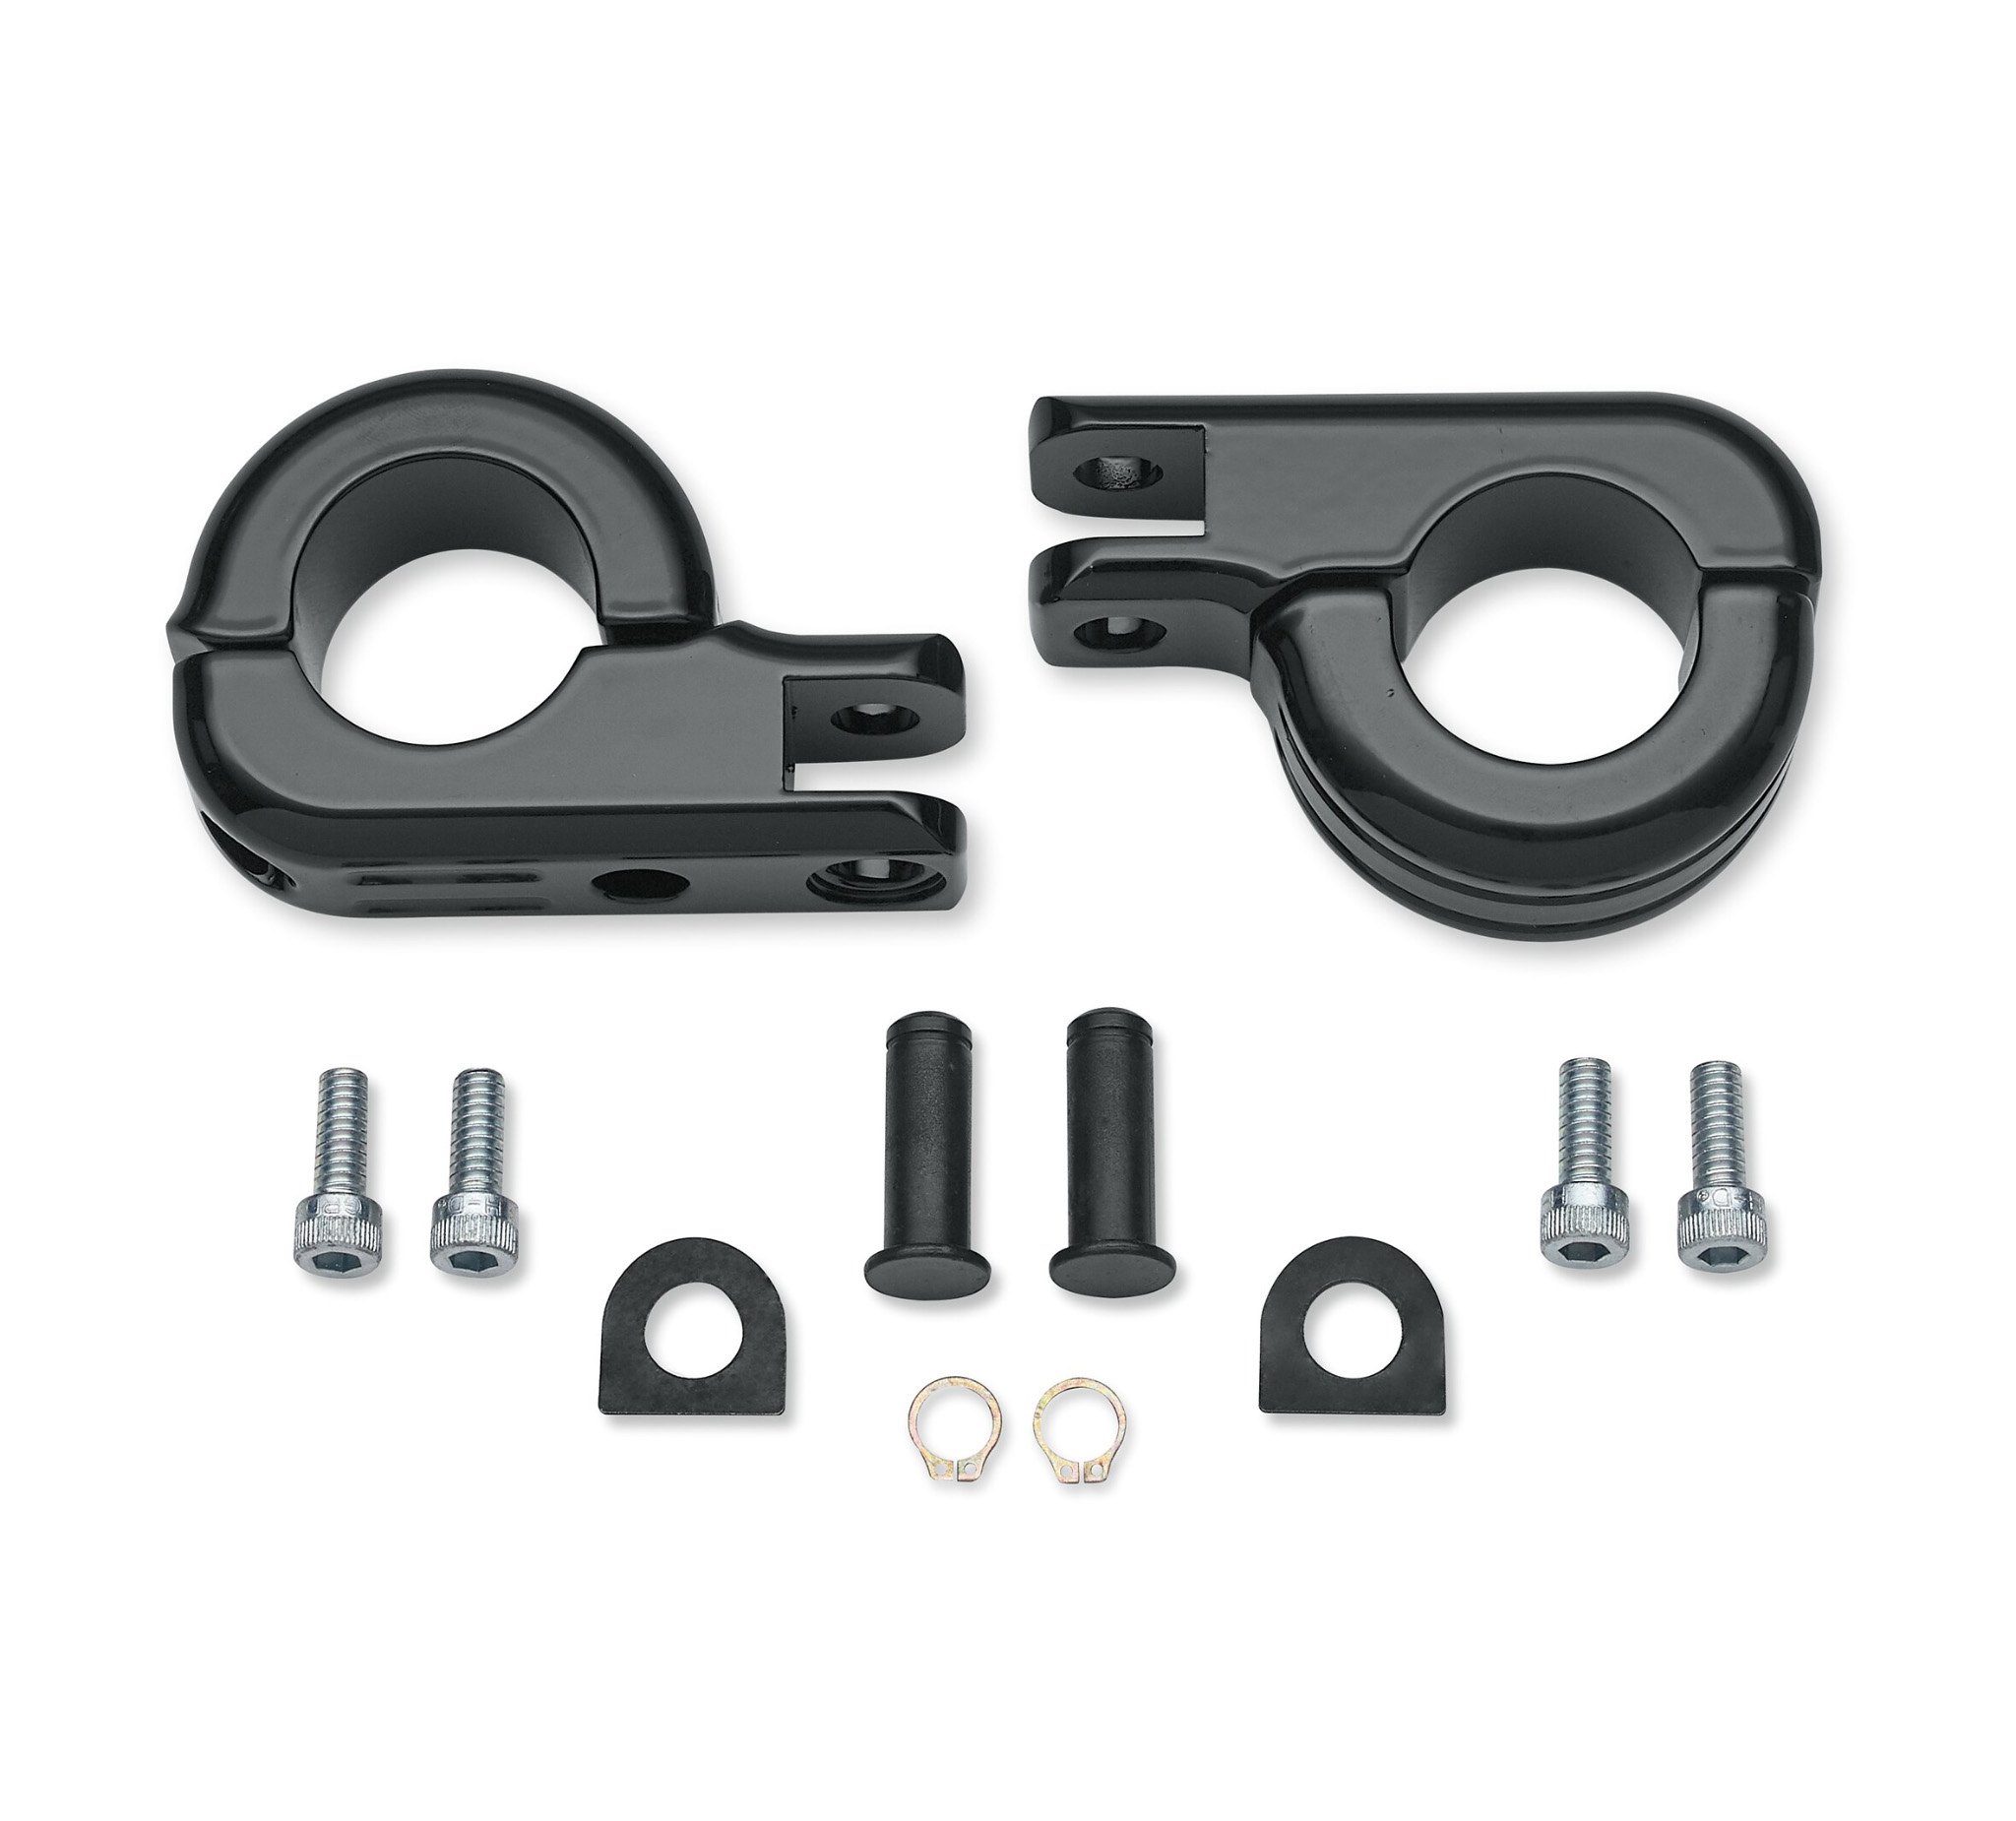 Motorcycle Black Foot rese footpeg P-Clamp mounting kits for harley 1 1/4 highway bars